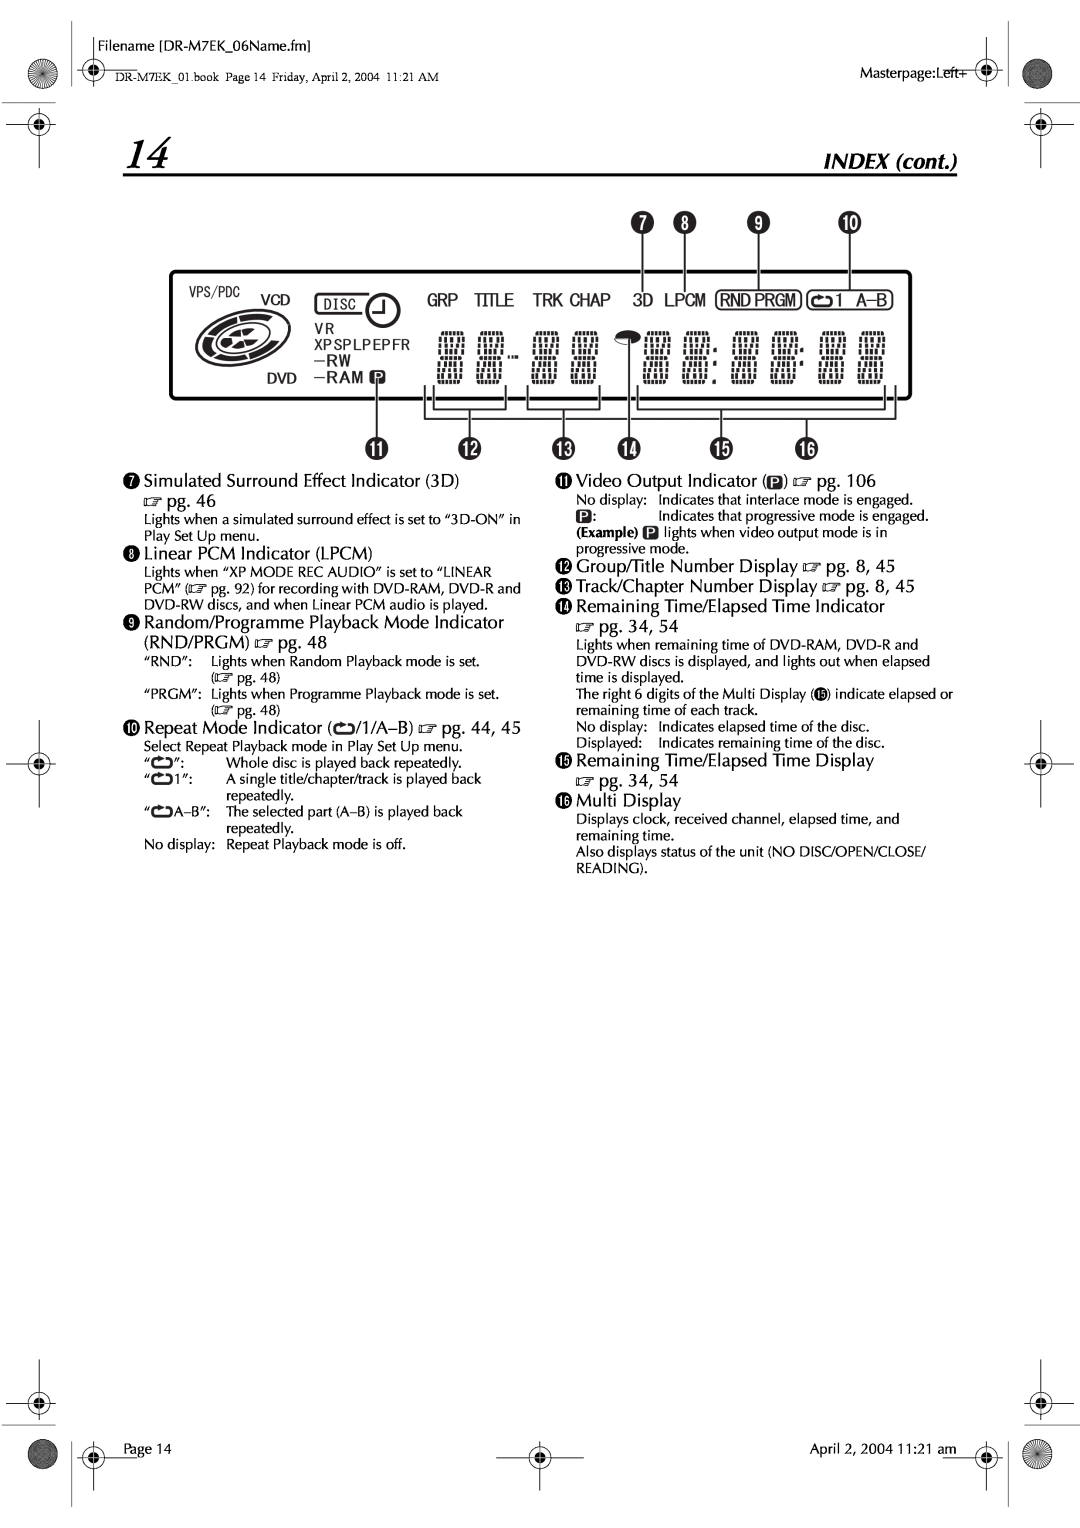 JVC DR-M7S manual INDEX cont, G Simulated Surround Effect Indicator 3D  pg, H Linear PCM Indicator LPCM,  pg. 34 